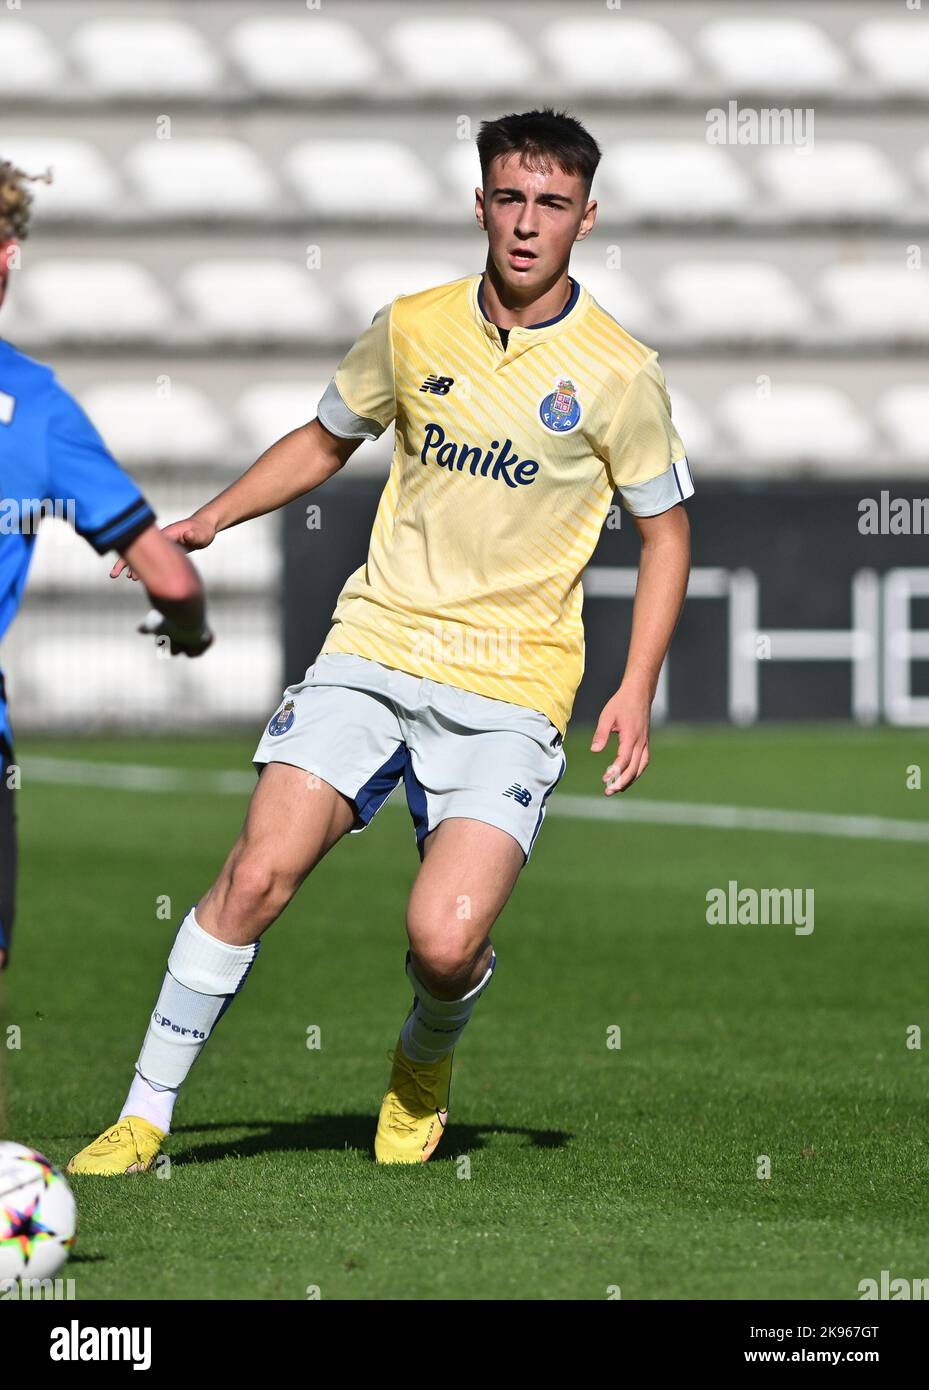 Martim Fernandes (2) of FC Porto pictured during a soccer game between the  youth teams of Club Brugge KV and FC Porto during the fifth matchday in  group B in the Uefa